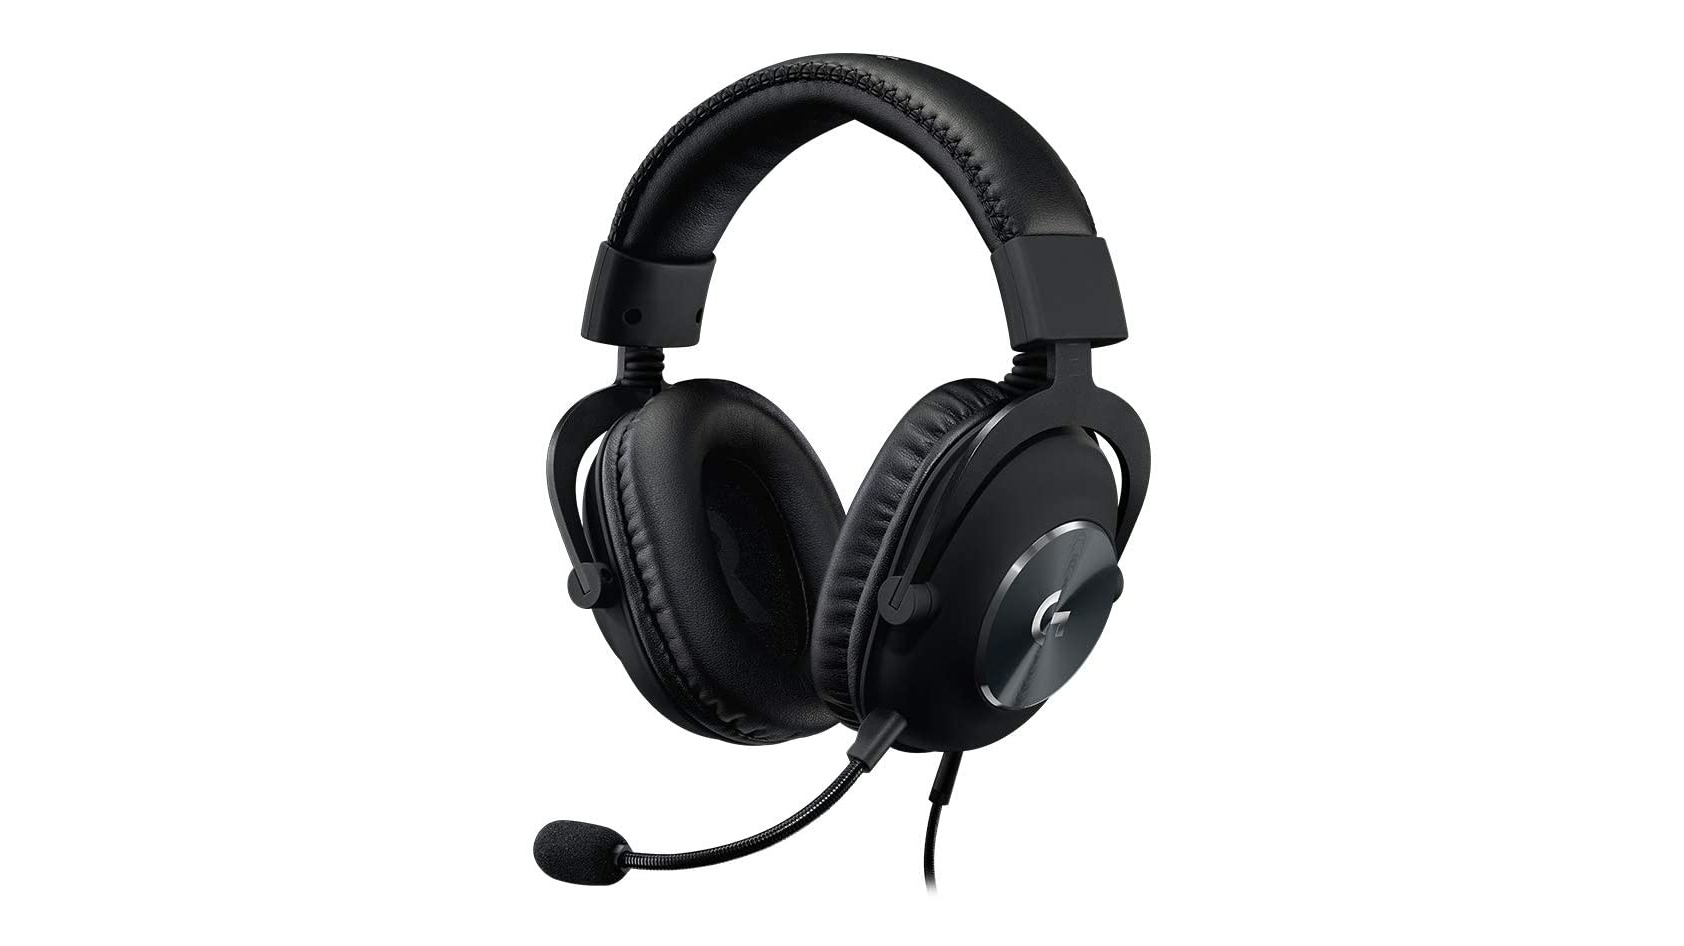 The Logitech G Pro X wired gaming headset in black against a white background.